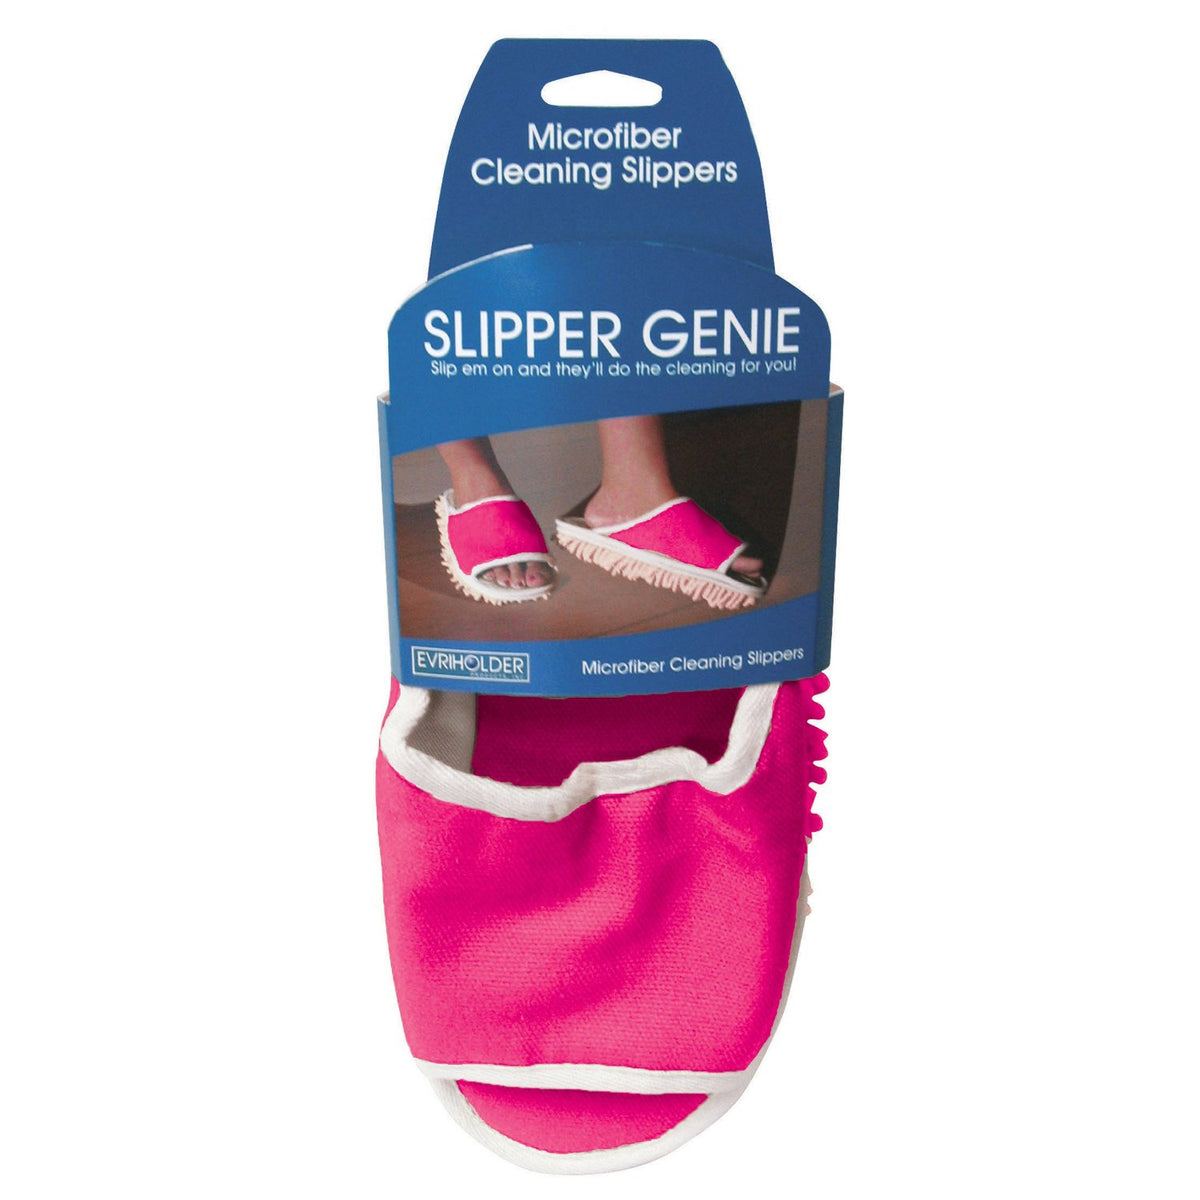 Buy slipper genie microfiber cleaning slippers - Online store for cleaning tools, electrostatic sweepers & accessories in USA, on sale, low price, discount deals, coupon code